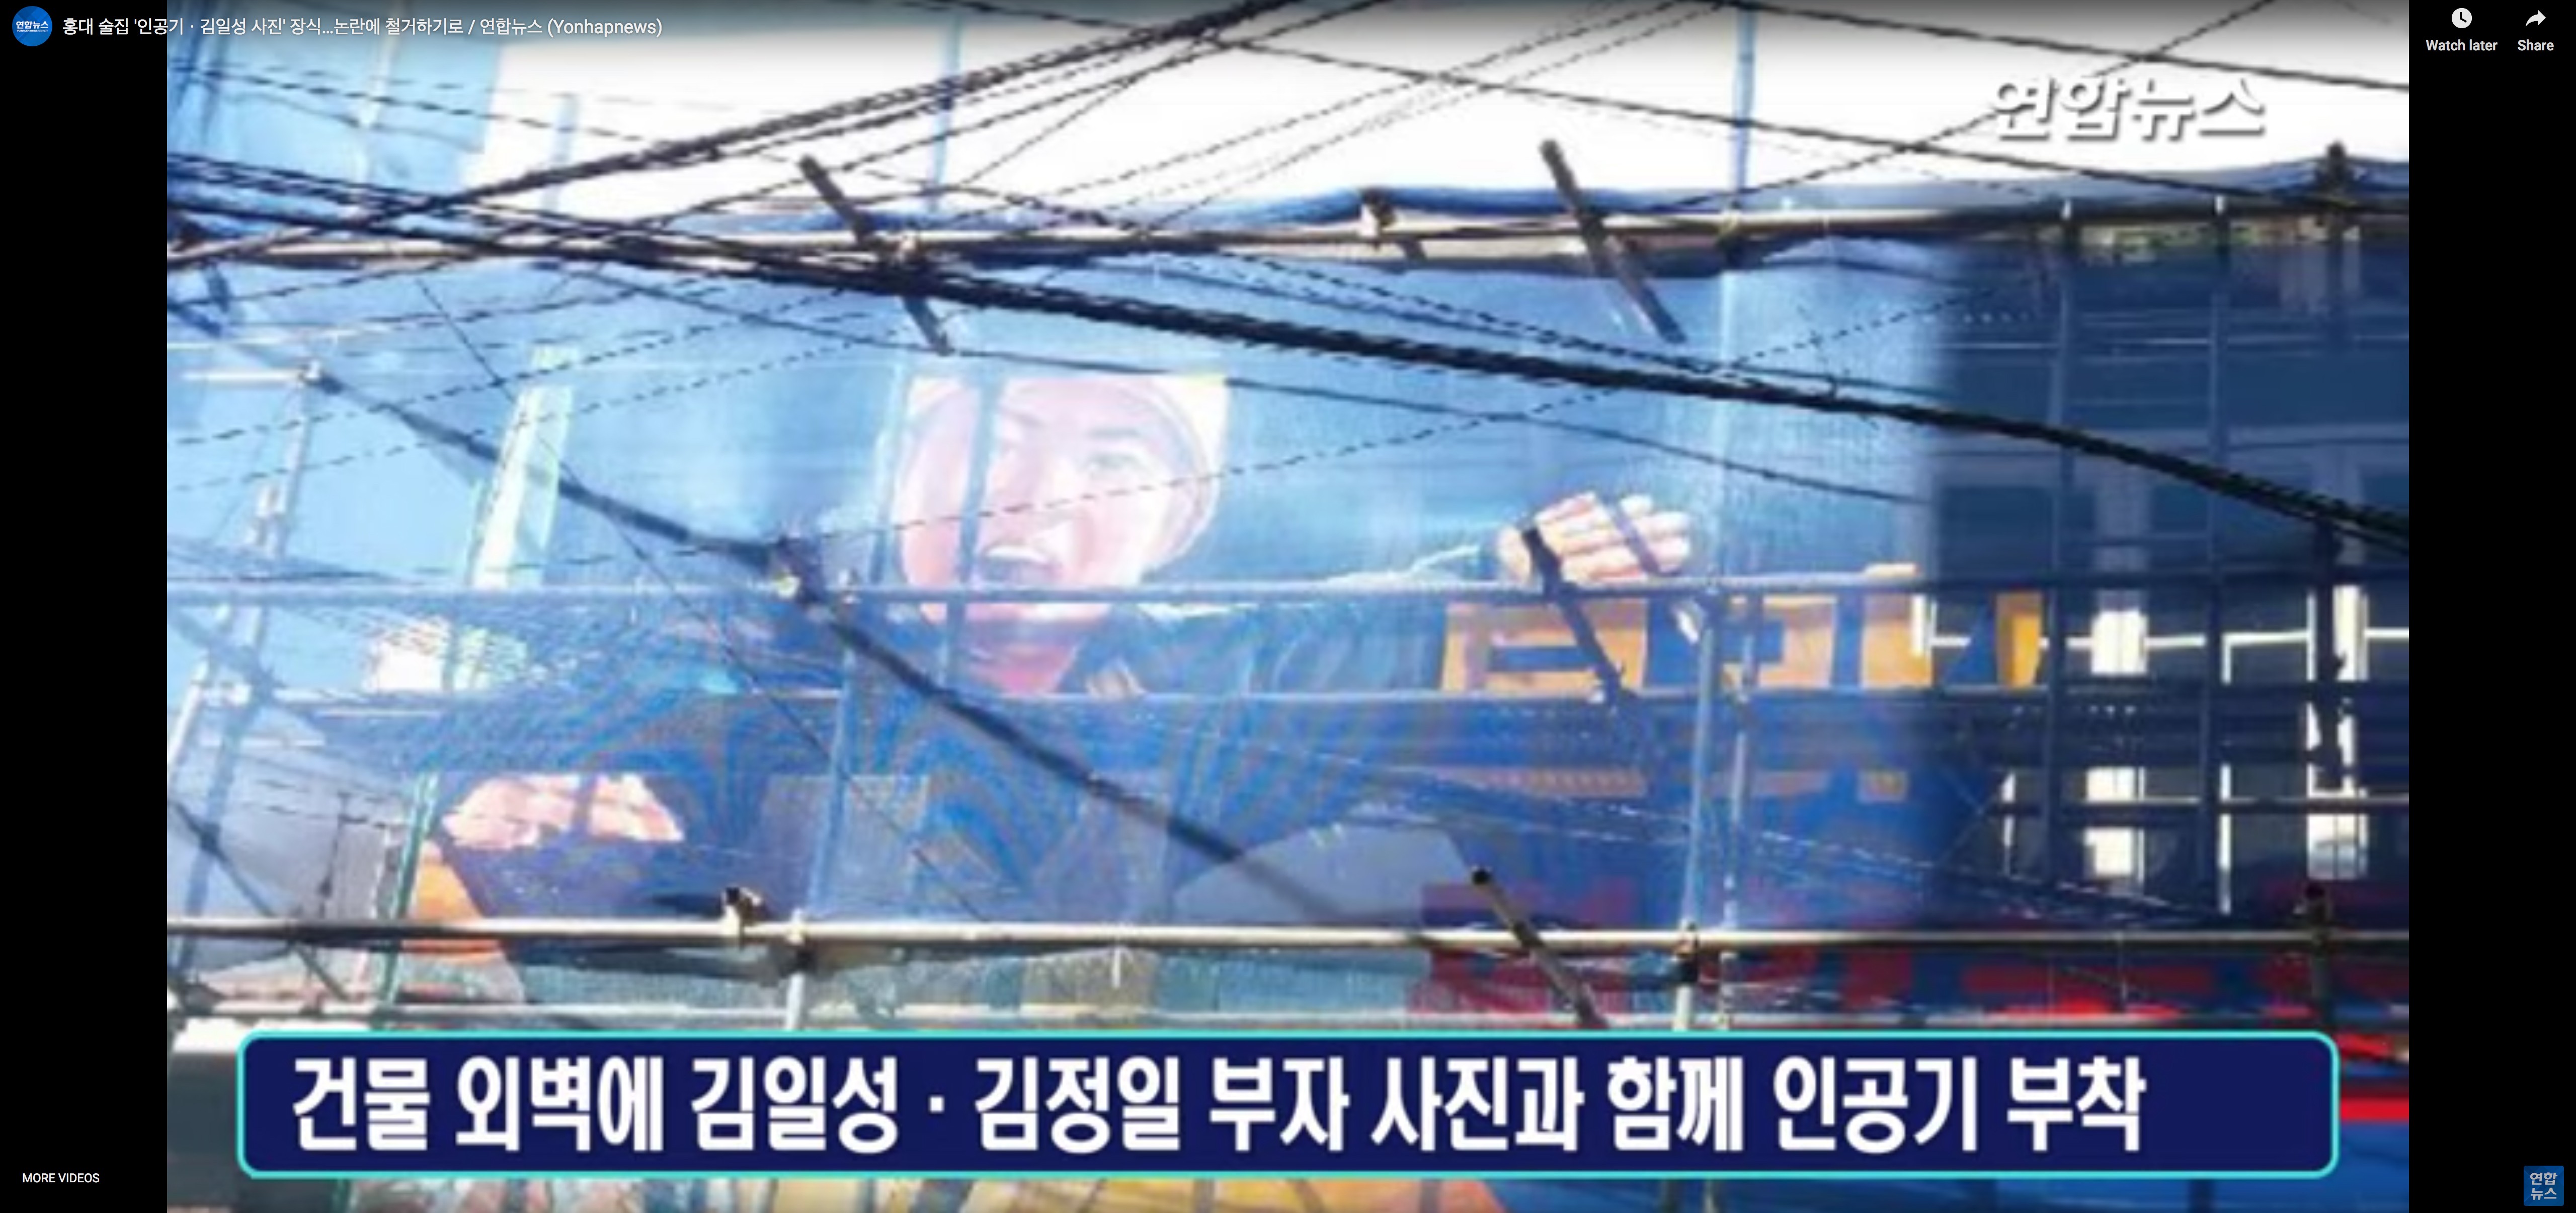 The exterior of the North Korea-themed restaurant in Seoul after the owner took down some of the offending images. Photo: YouTube